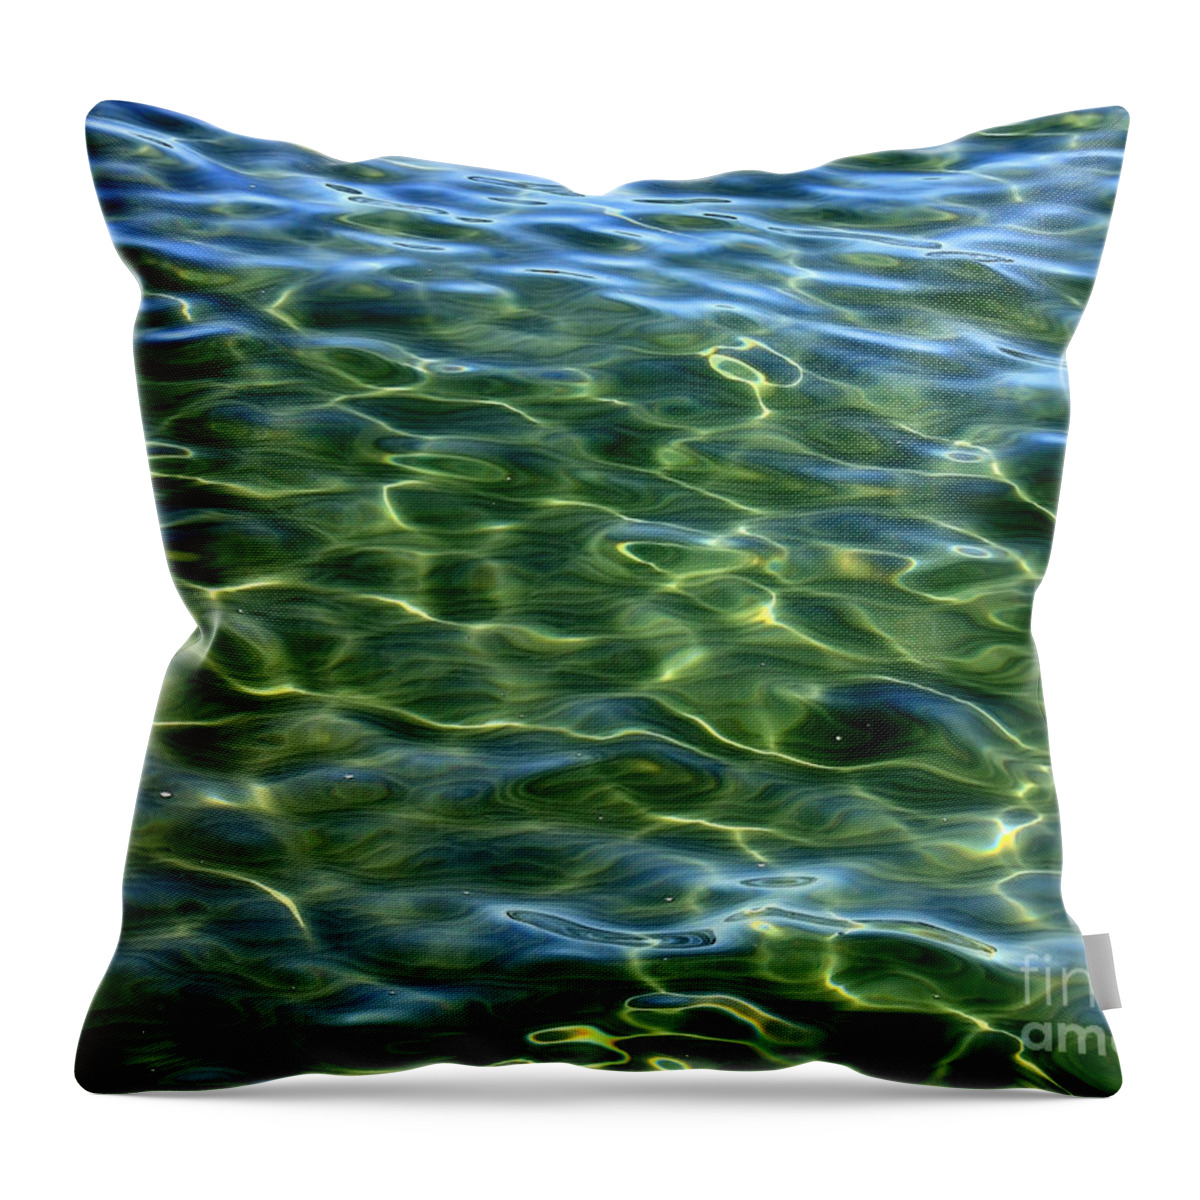 Water Abstract Throw Pillow featuring the photograph Lake Tahoe Swirls Abstract by Carol Groenen